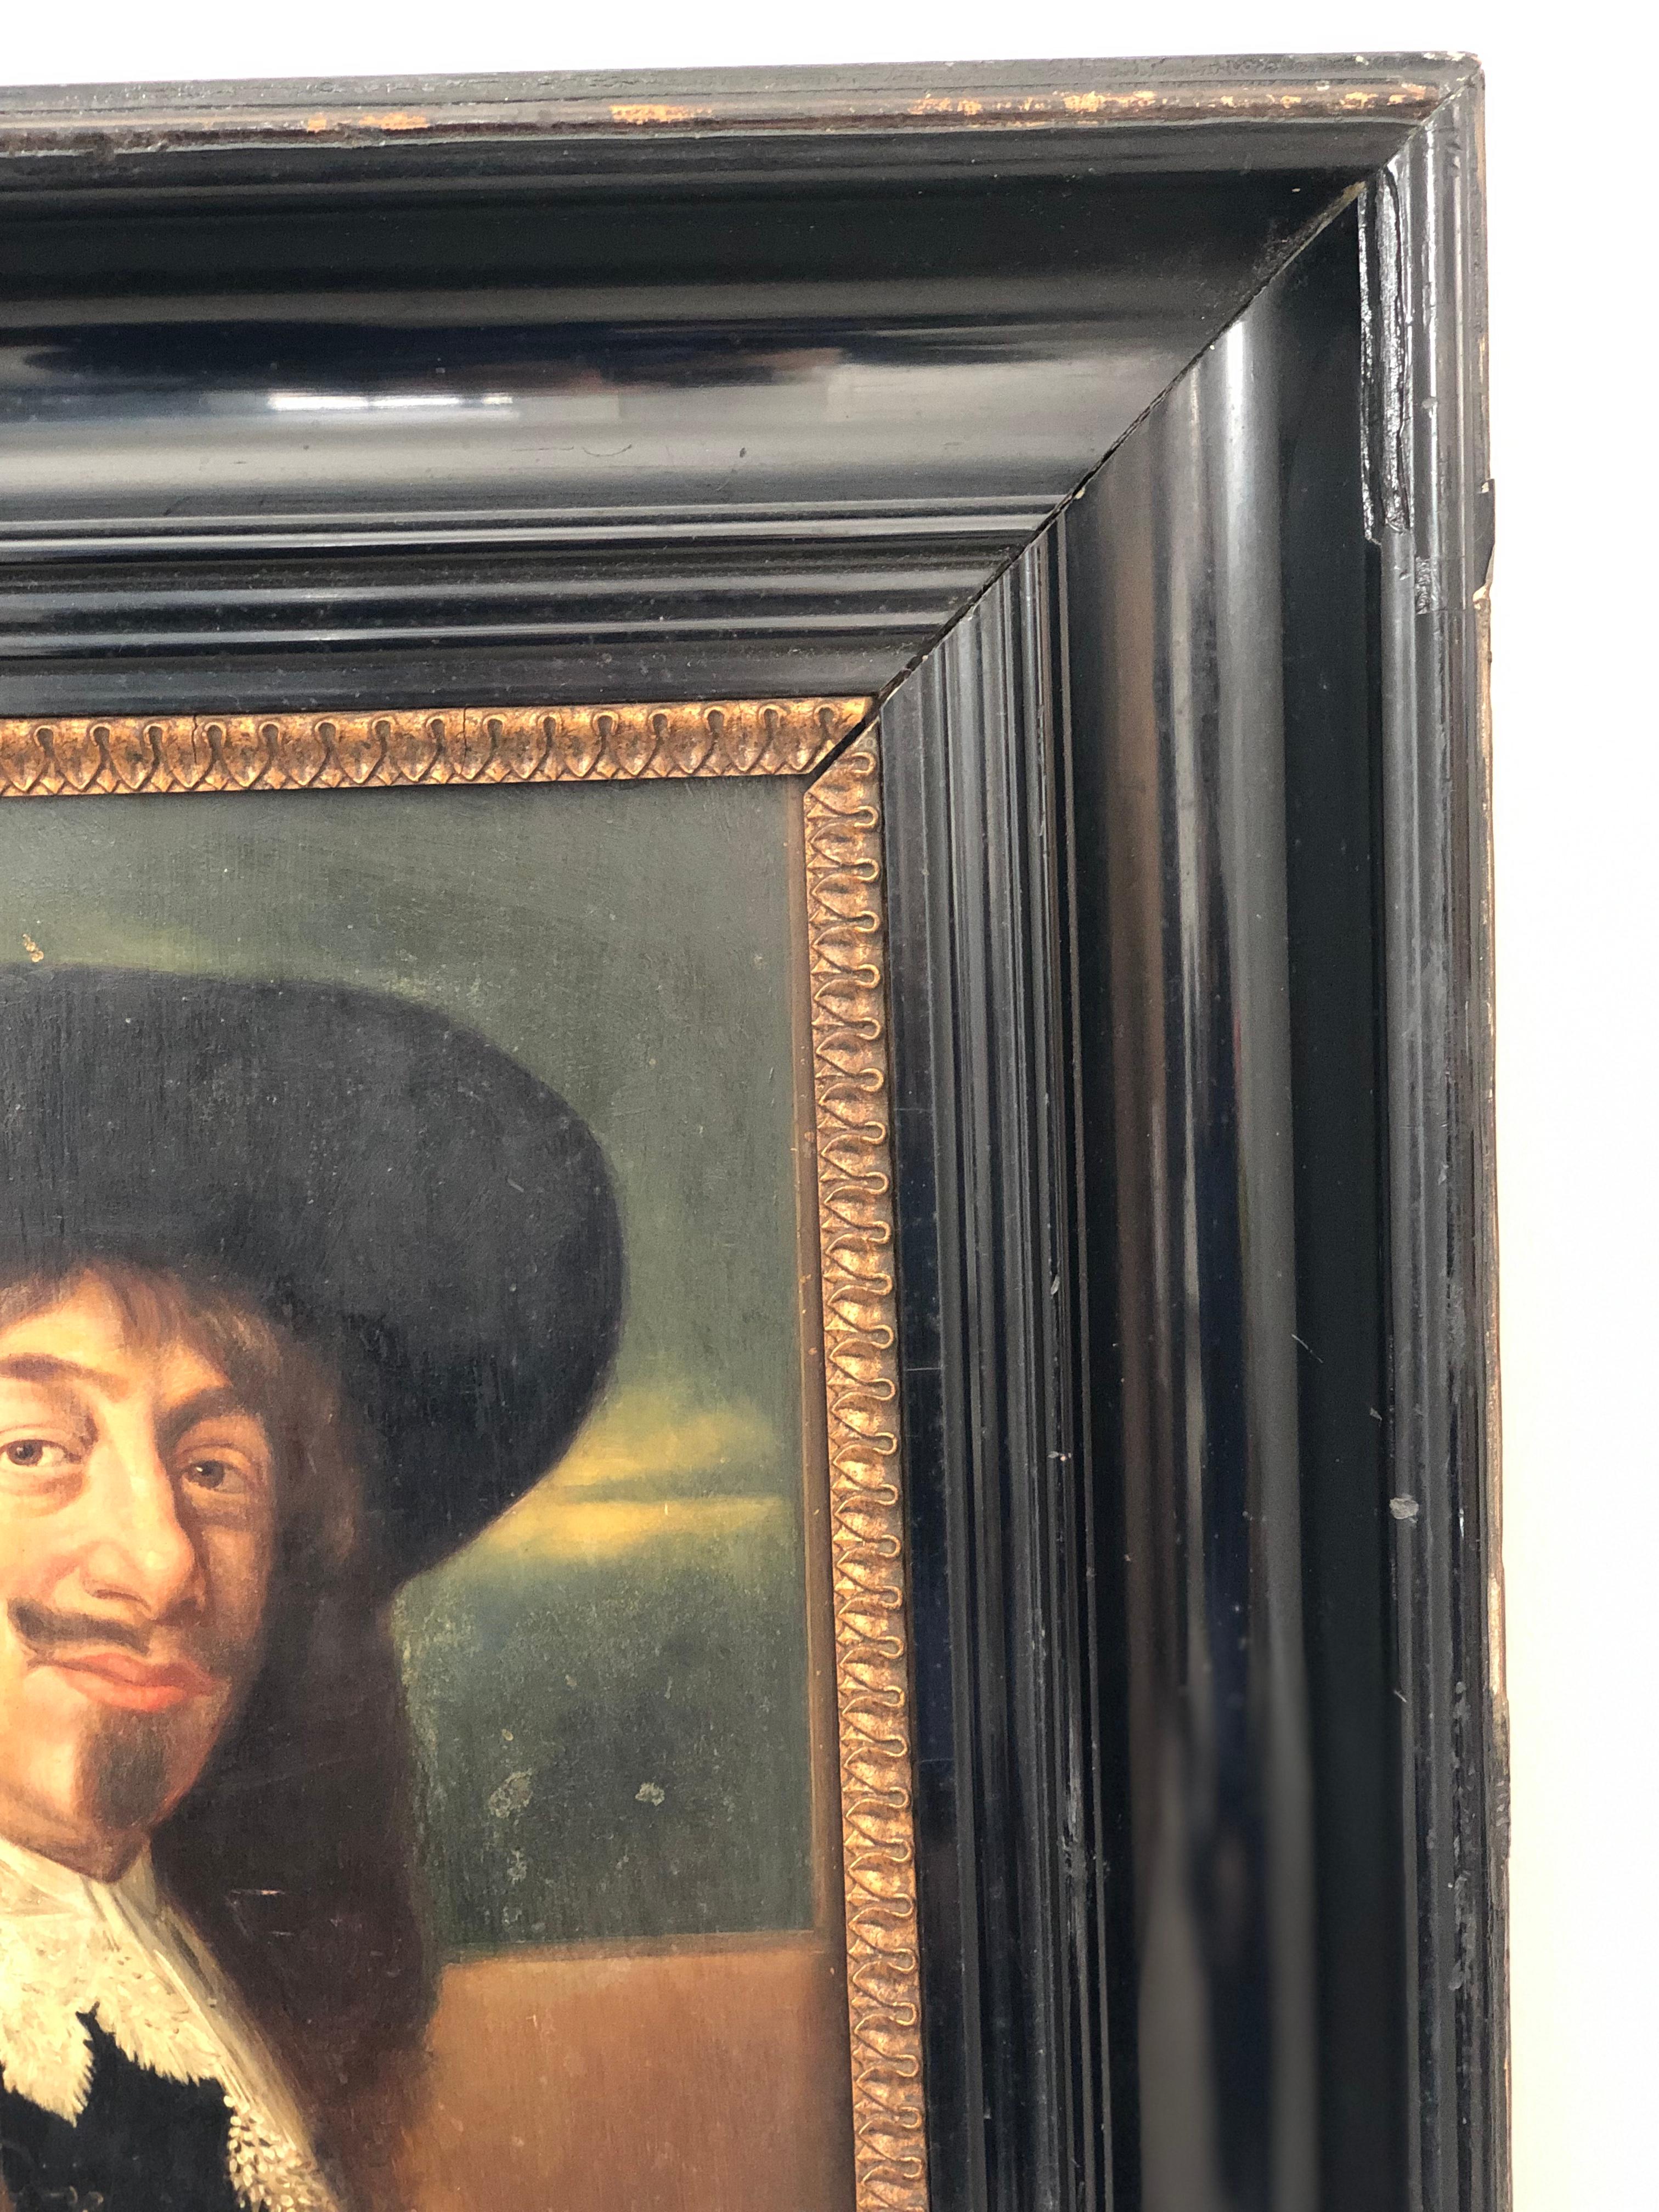 Other Late 19th Century Oil Painting of a Noble Man from the Dutch Golden Age Era For Sale